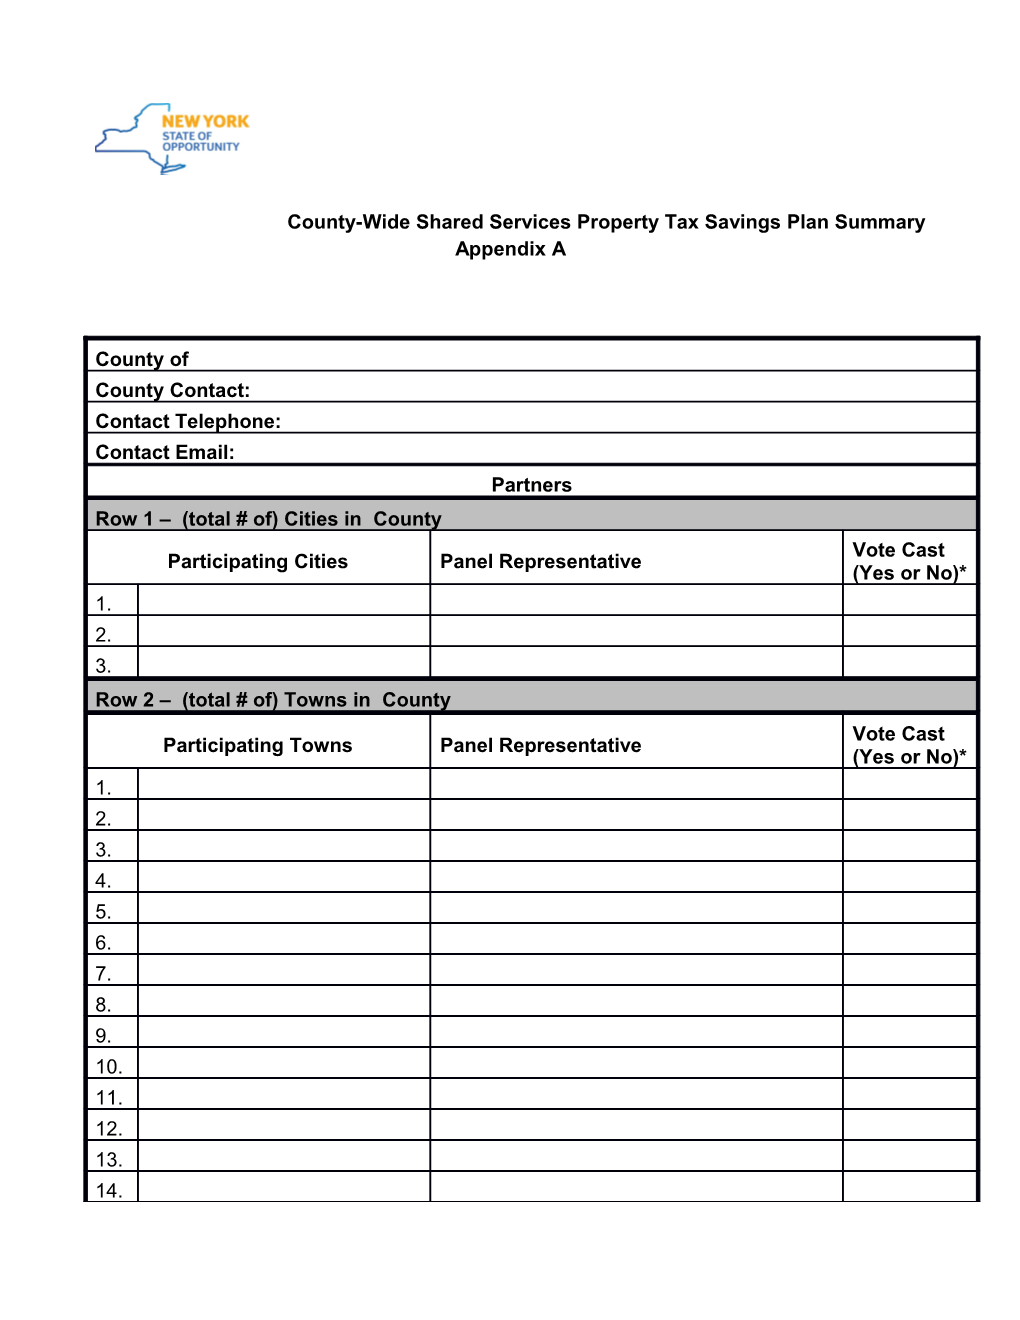 County-Wide Shared Services Property Tax Savings Plan Summary